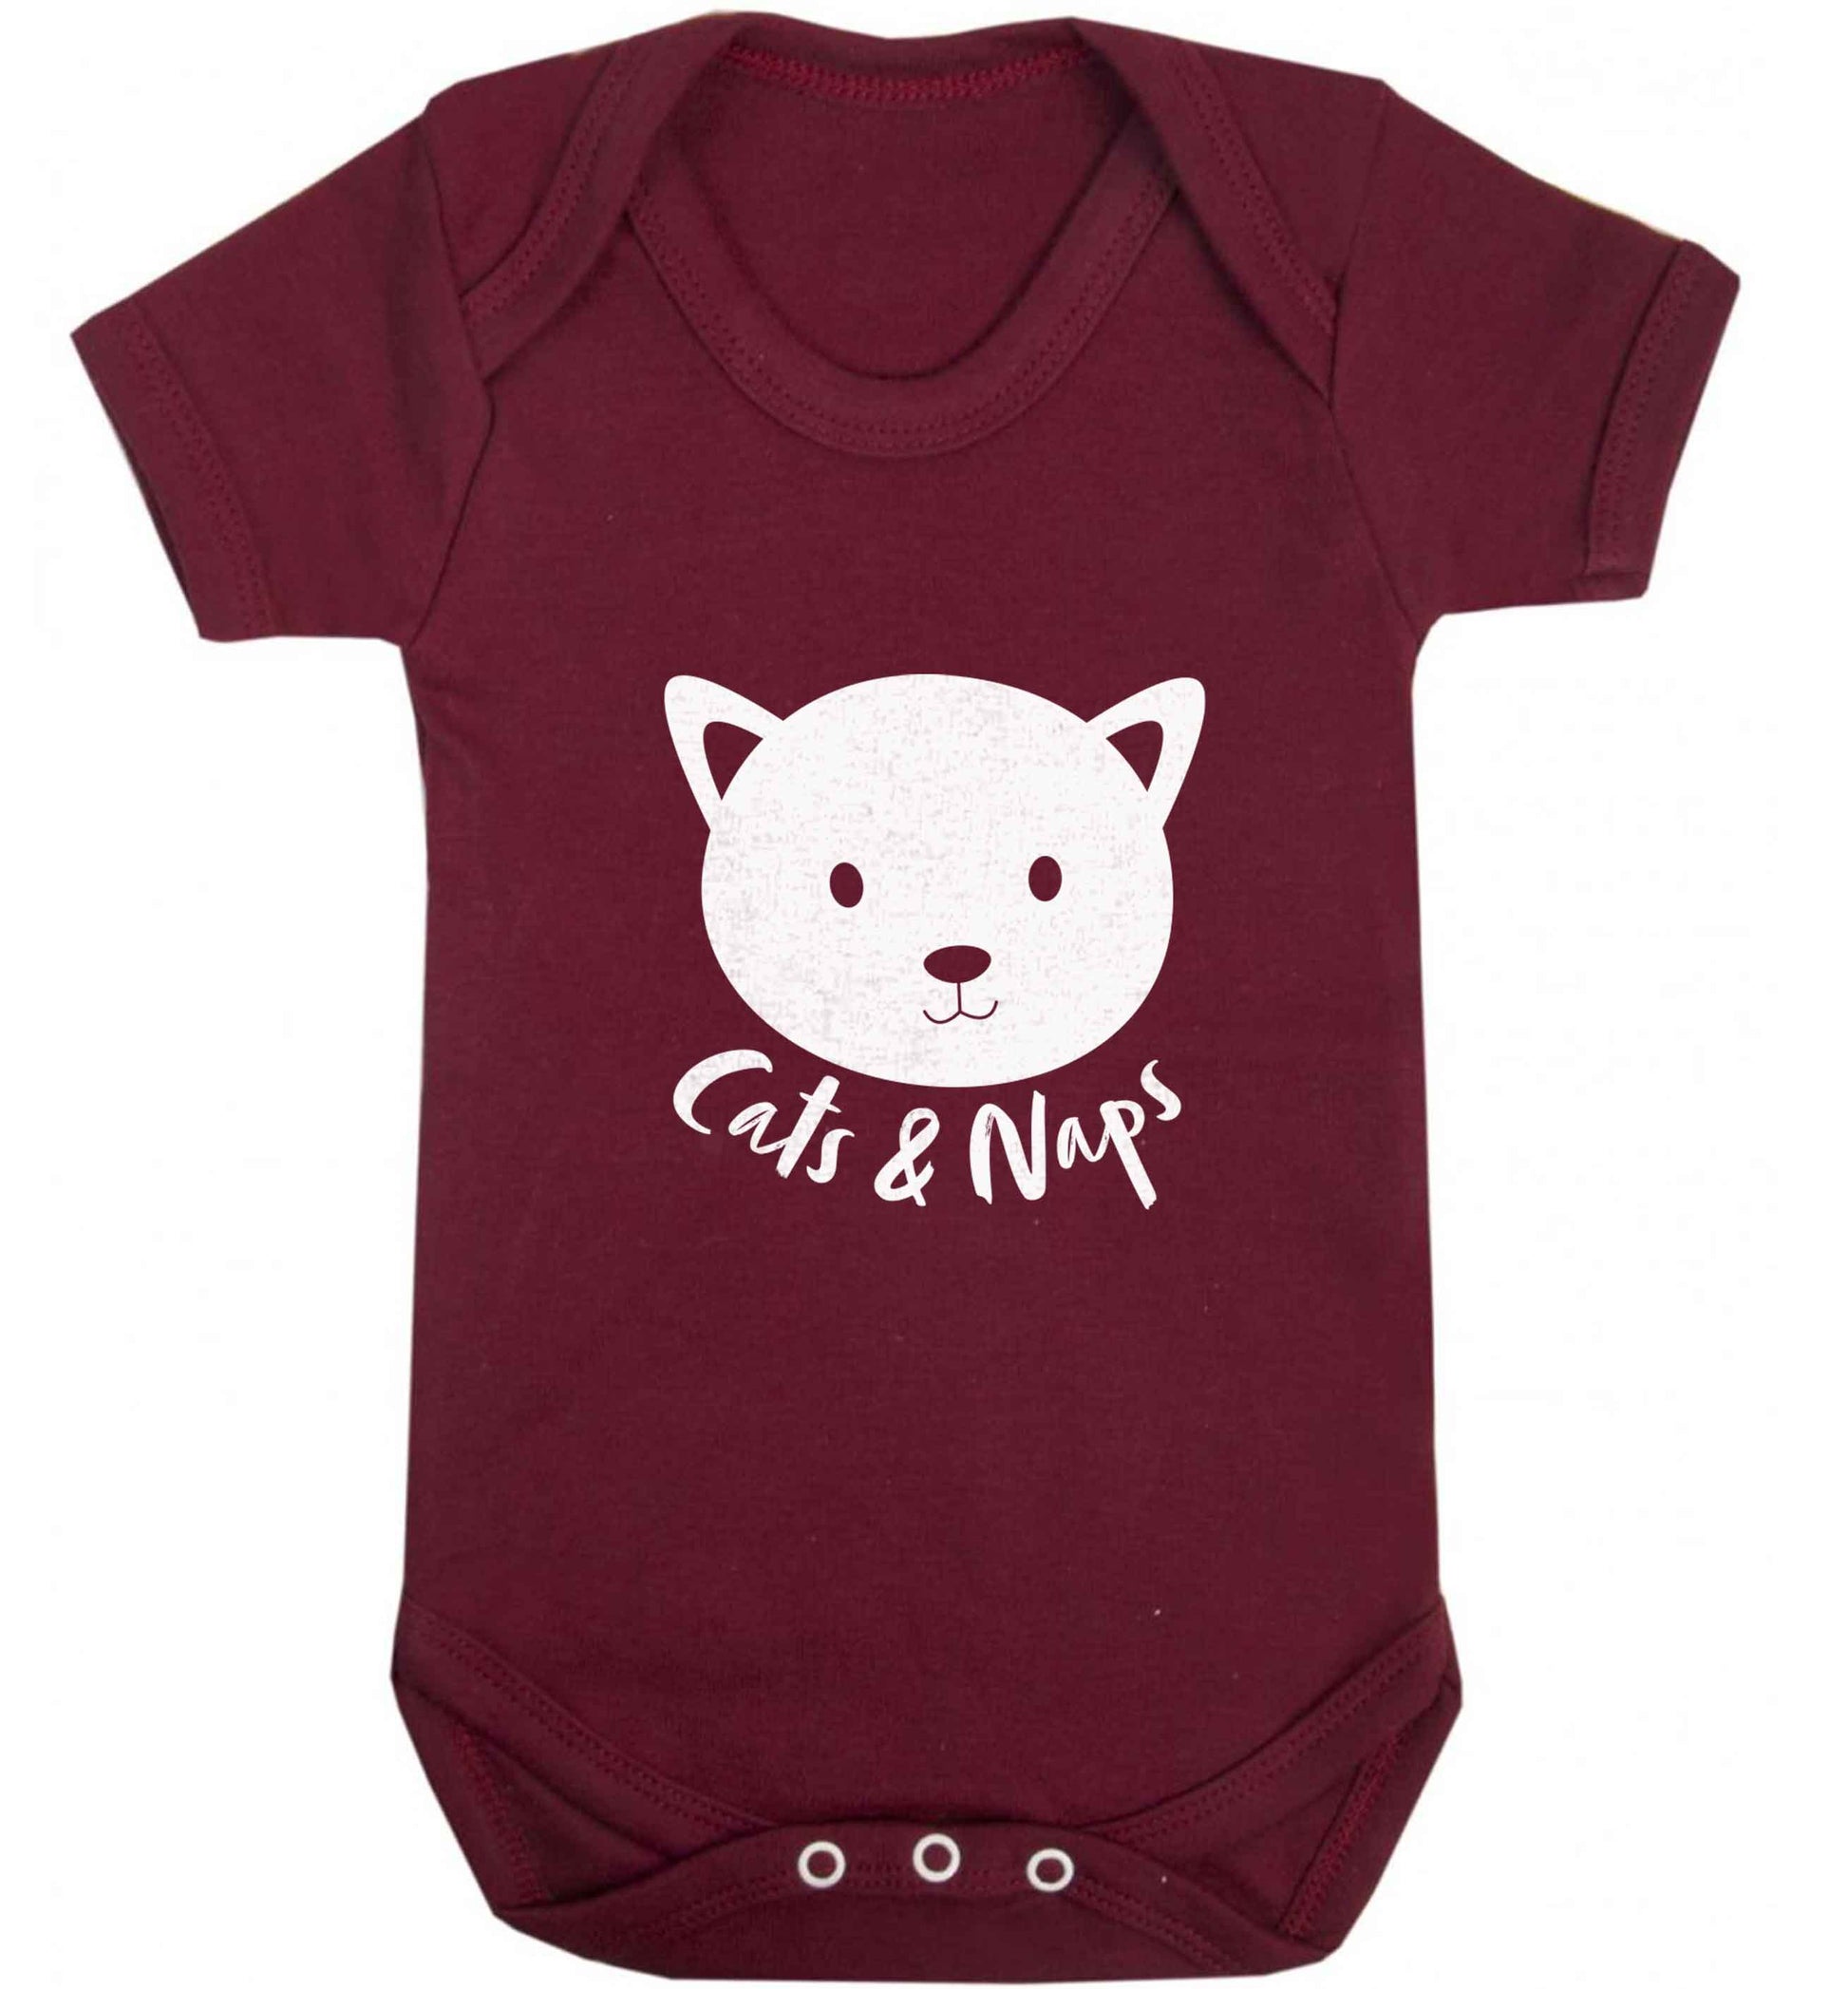 Cats and naps Kit baby vest maroon 18-24 months